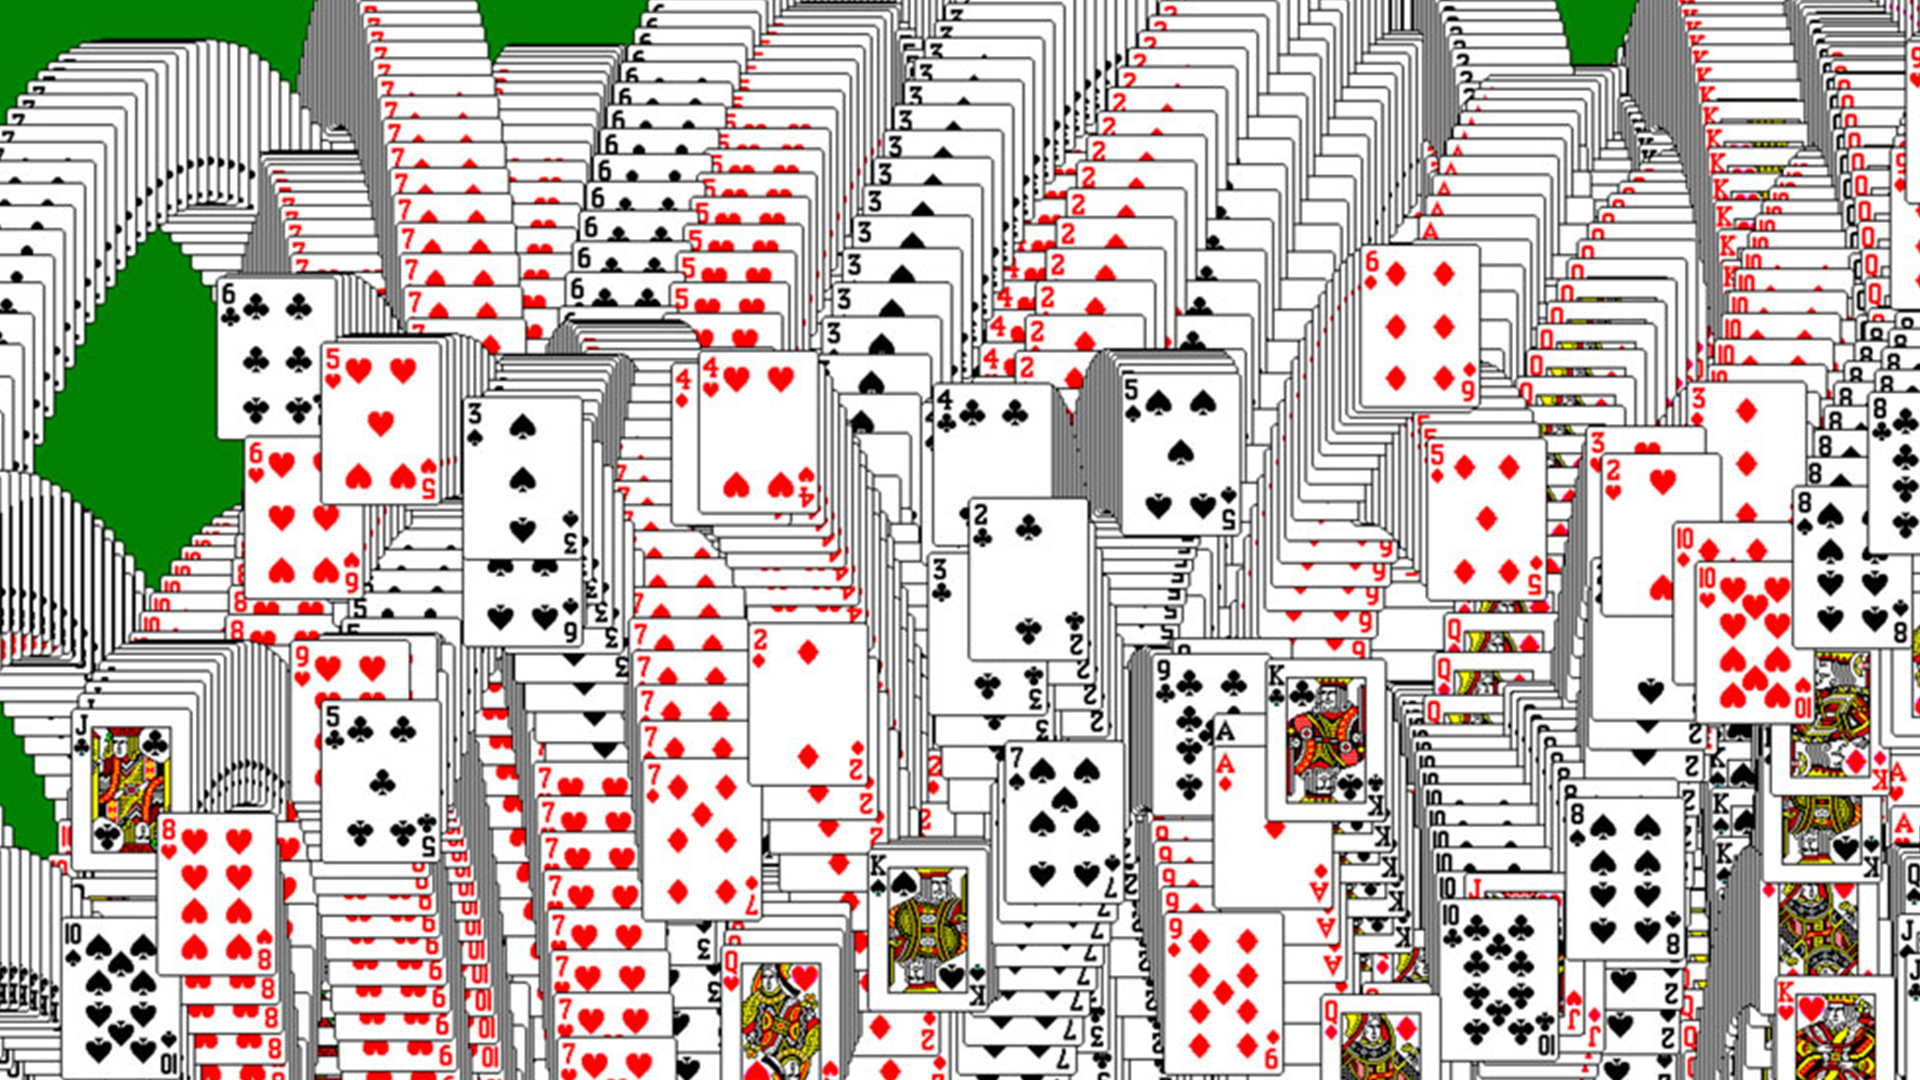 Solitaire World Record (5 Seconds) 